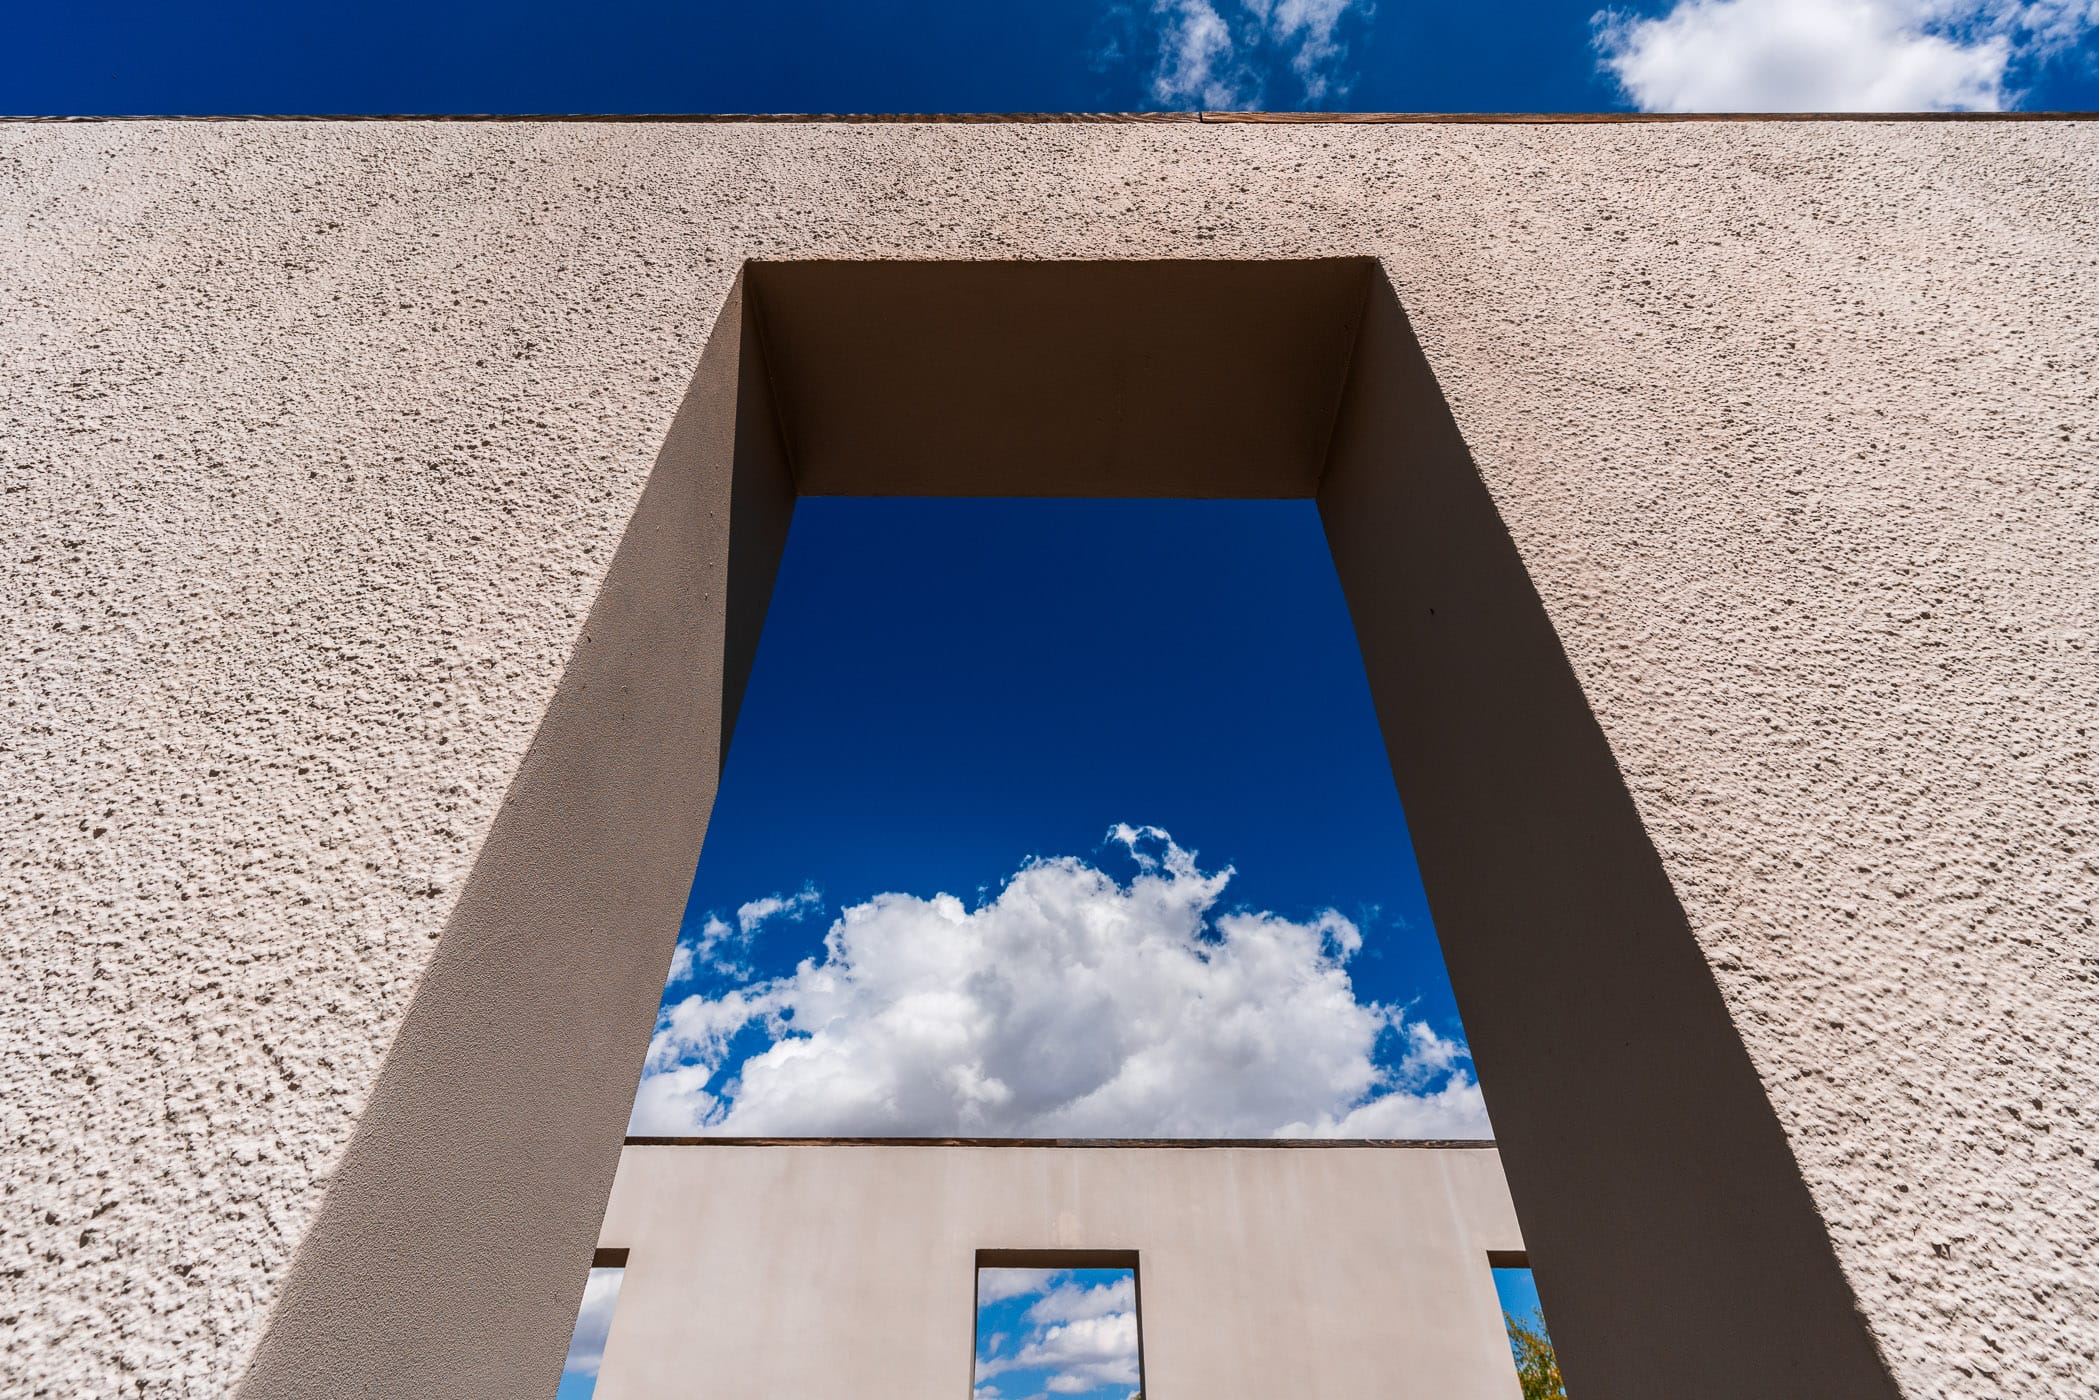 Detail of sculptor Robert Irwin's large-scale "untitled (dawn to dusk)" on the grounds of the Chinati Foundation, Marfa, Texas.